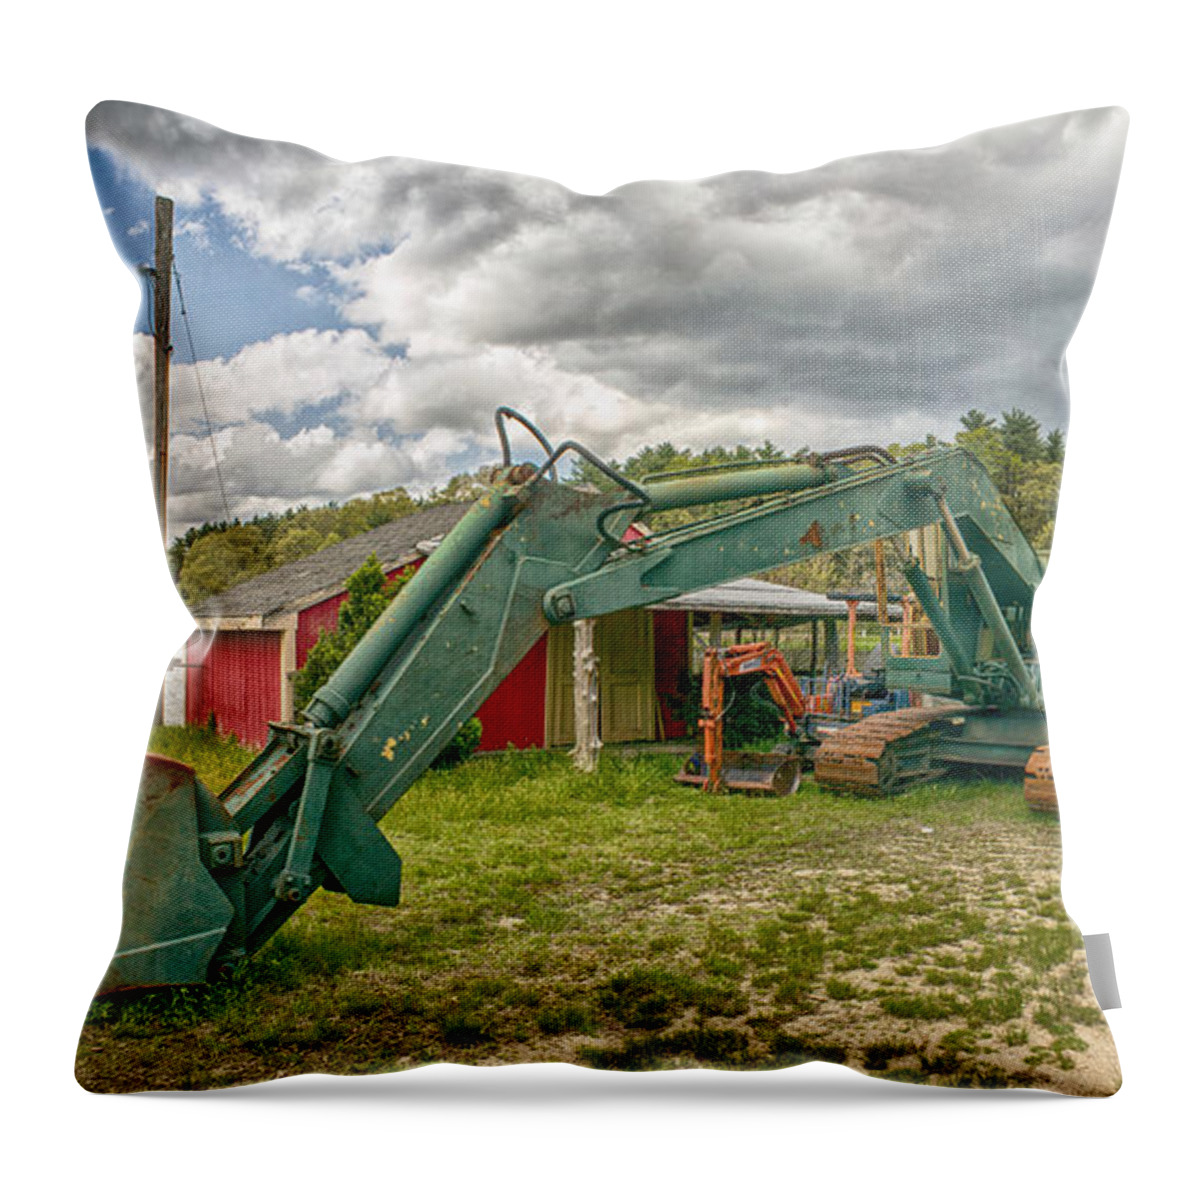 Old Throw Pillow featuring the photograph Big Shovel For A Small Berry by Constantine Gregory